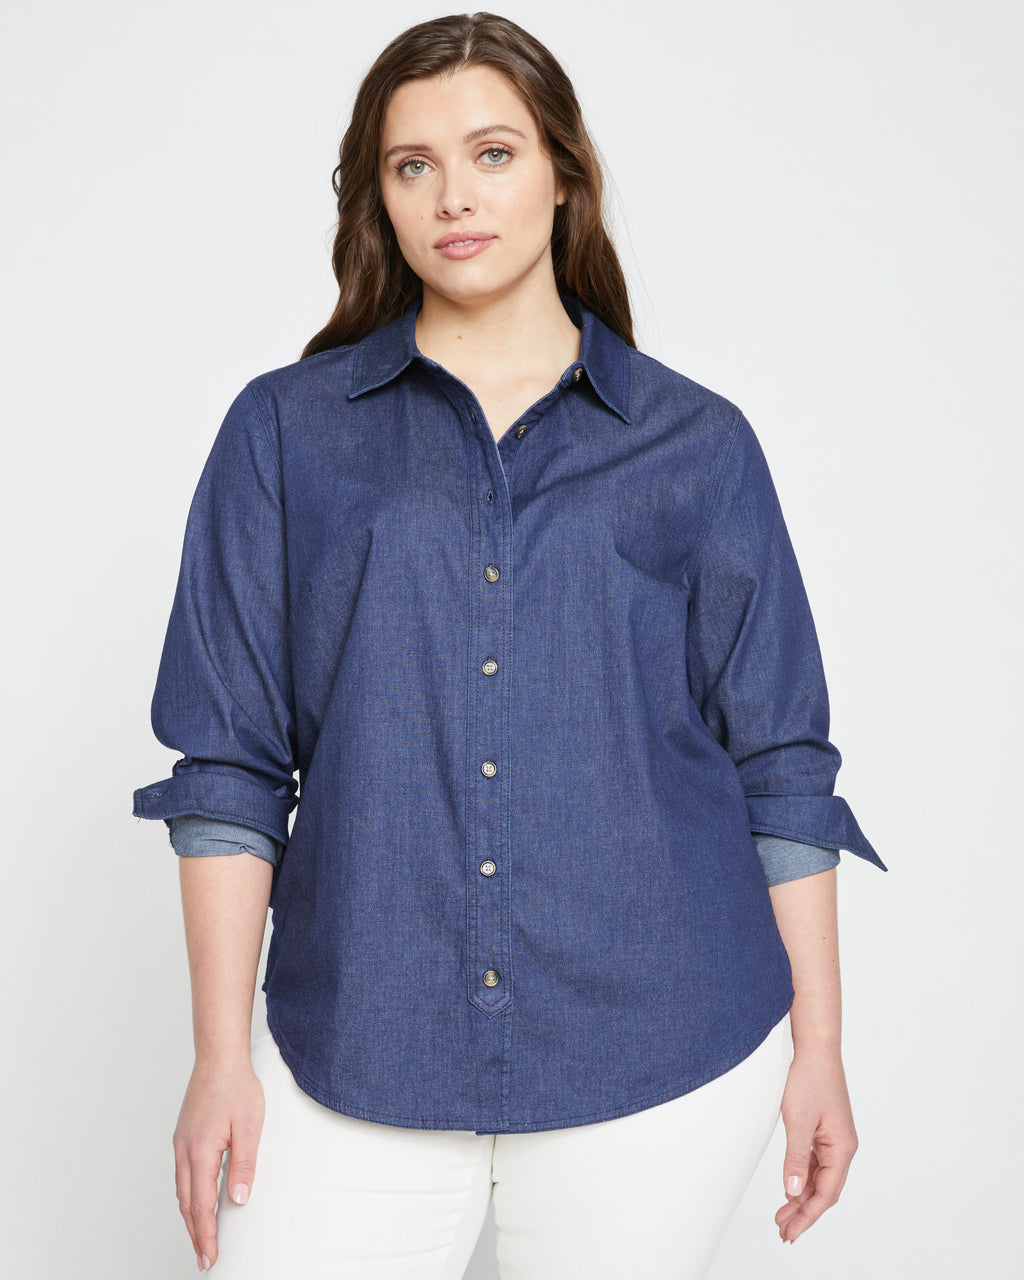 Buy THE DENIM DEVISION Women Cotton denim Shirt Online in Pakistan On  Clicky.pk at Lowest Prices | Cash On Delivery All Over the Pakistan